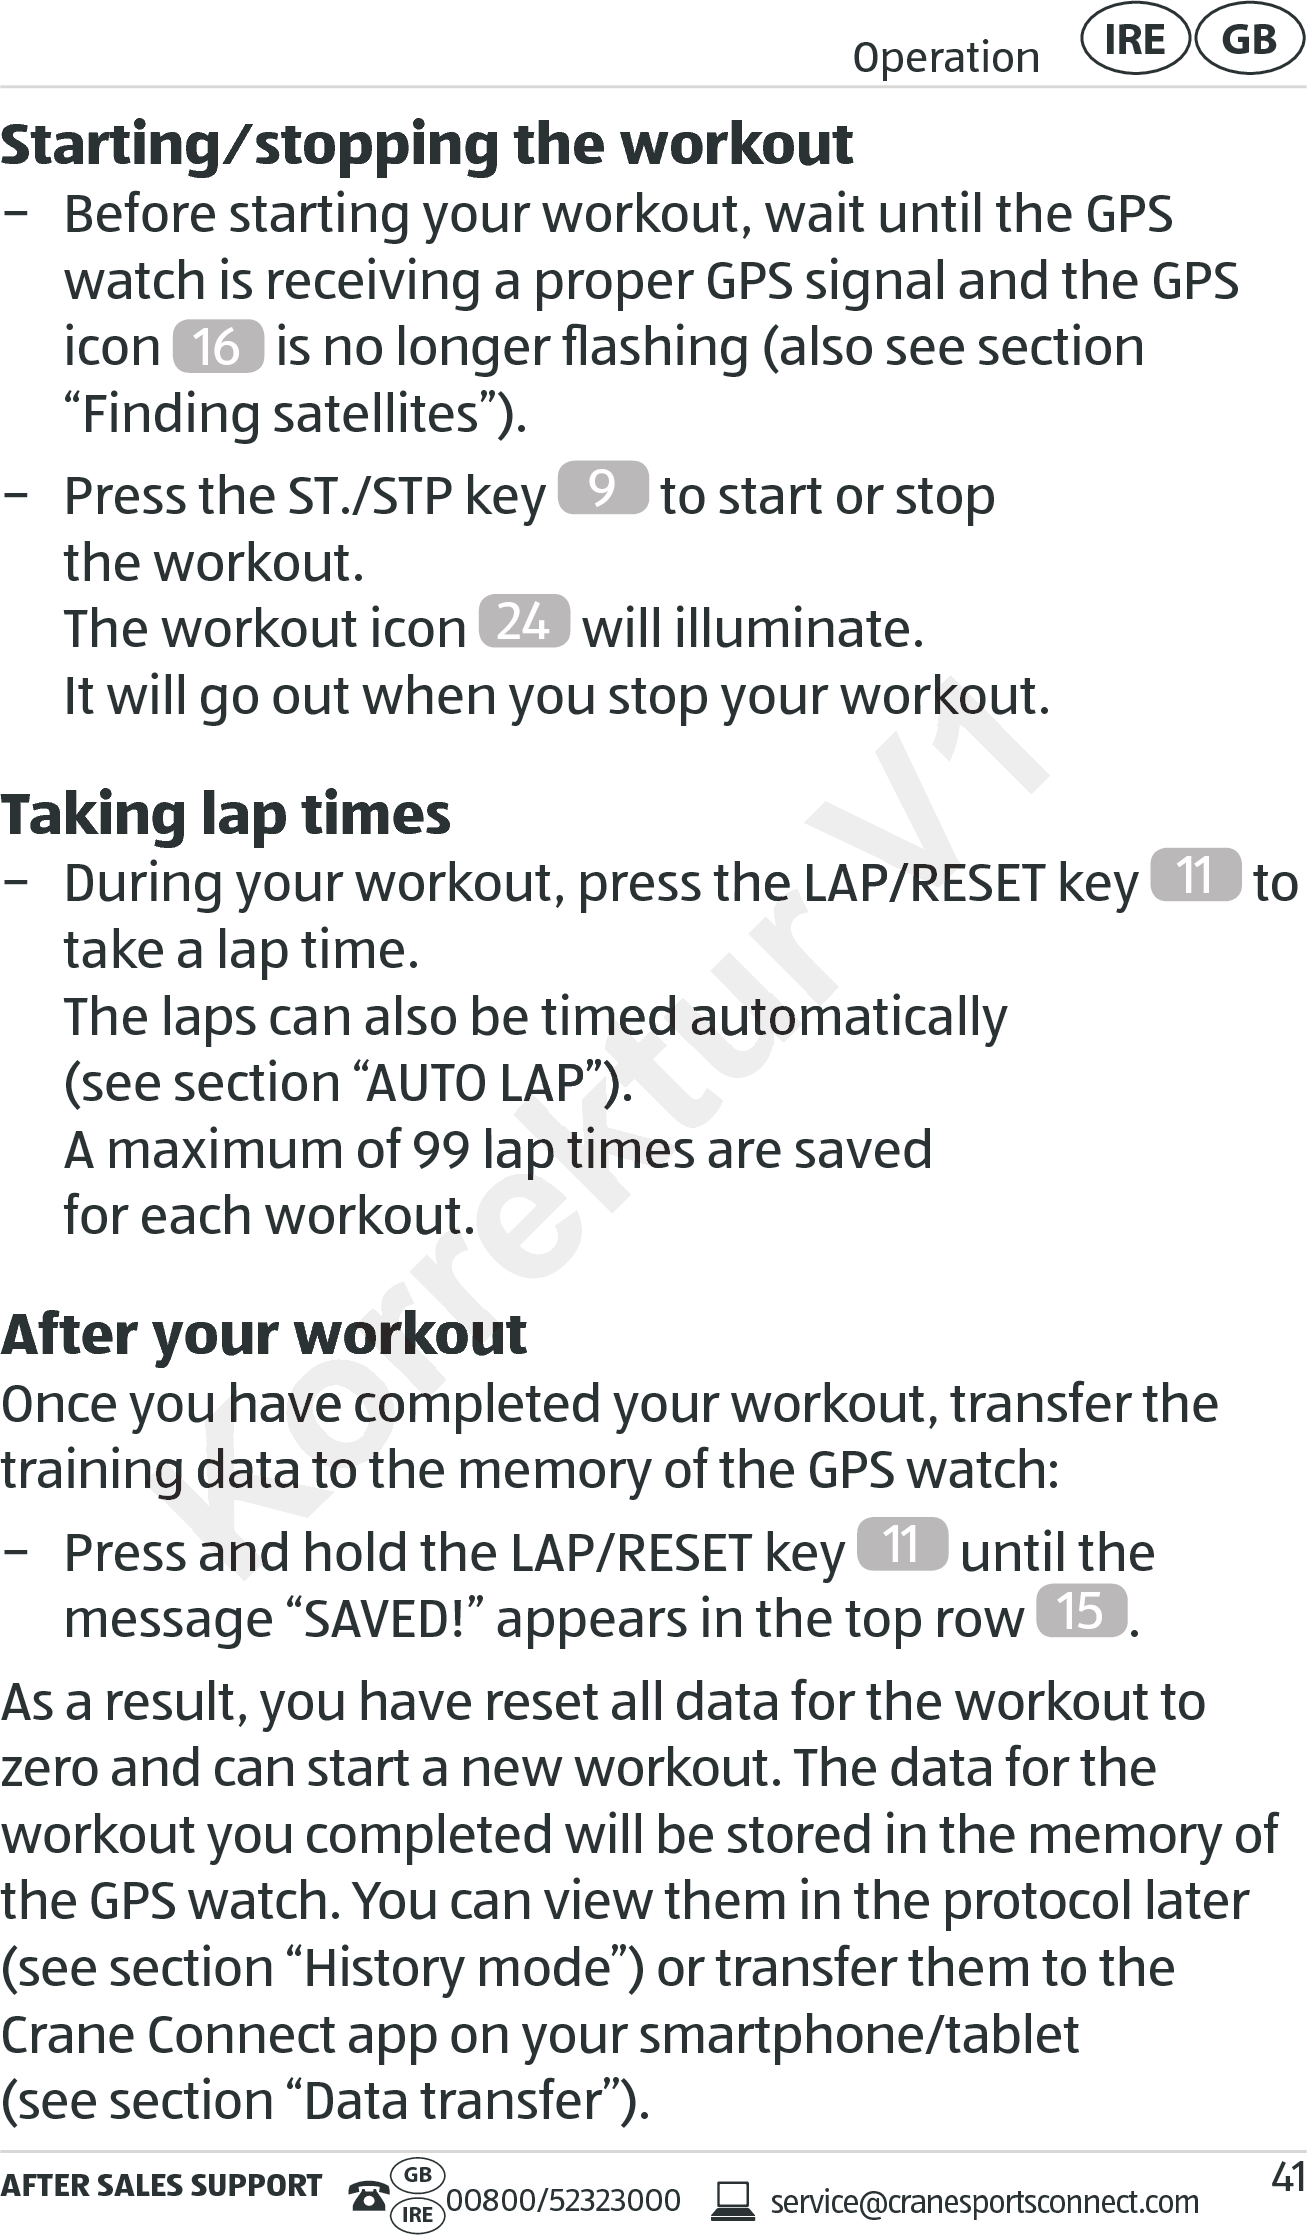 AFTER SALES SUPPORTservice@cranesportsconnect.comGBIRE 00800/52323000Operation GBIRE41Starting⁄stopping the workout − Before starting your workout, wait until the GPS watch is receiving a proper GPS signal and the GPS icon  16  is no longer ﬂashing (also see section  “Finding satellites”). − Press the ST./STP key  9 to start or stop  the workout. The workout icon  24  will illuminate.  It will go out when you stop your workout.Taking lap times − During your workout, press the LAP/RESET key 11  to take a lap time. The laps can also be timed automatically  (see section “AUTO LAP”). A maximum of 99 lap times are saved  for each workout.After your workoutOnce you have completed your workout, transfer the training data to the memory of the GPS watch: − Press and hold the LAP/RESET key  11  until the  message “SAVED!” appears in the top row  15 .As a result, you have reset all data for the workout to zero and can start a new workout. The data for the  workout you completed will be stored in the memory of the GPS watch. You can view them in the protocol later (see section “History mode”) or transfer them to the Crane Connect app on your smartphone/tablet  (see section “Data transfer”).Korrektur , press the LAP/RESET key, press the LAP/RESET keyThe laps can also be timed automatically  The laps can also be timed automatically  (see section “AUTO LAP”). (see section “AUTO LAP”). A maximum of 99 lap times are saved  A maximum of 99 lap times are saved  for each workout.for each workout.After your workoutAfter your workoutOnce you have completed your workout, transfer the Once you have completed your workout, transfer the training data to the memory of the GPS watch:training data to the memory of the GPS watch:− Press and hold the LAP/RESET− Press and hold the LAP/RESETV1It will go out when you stop your workout.It will go out when you stop your workout., press the LAP/RESET key, press the LAP/RESET key